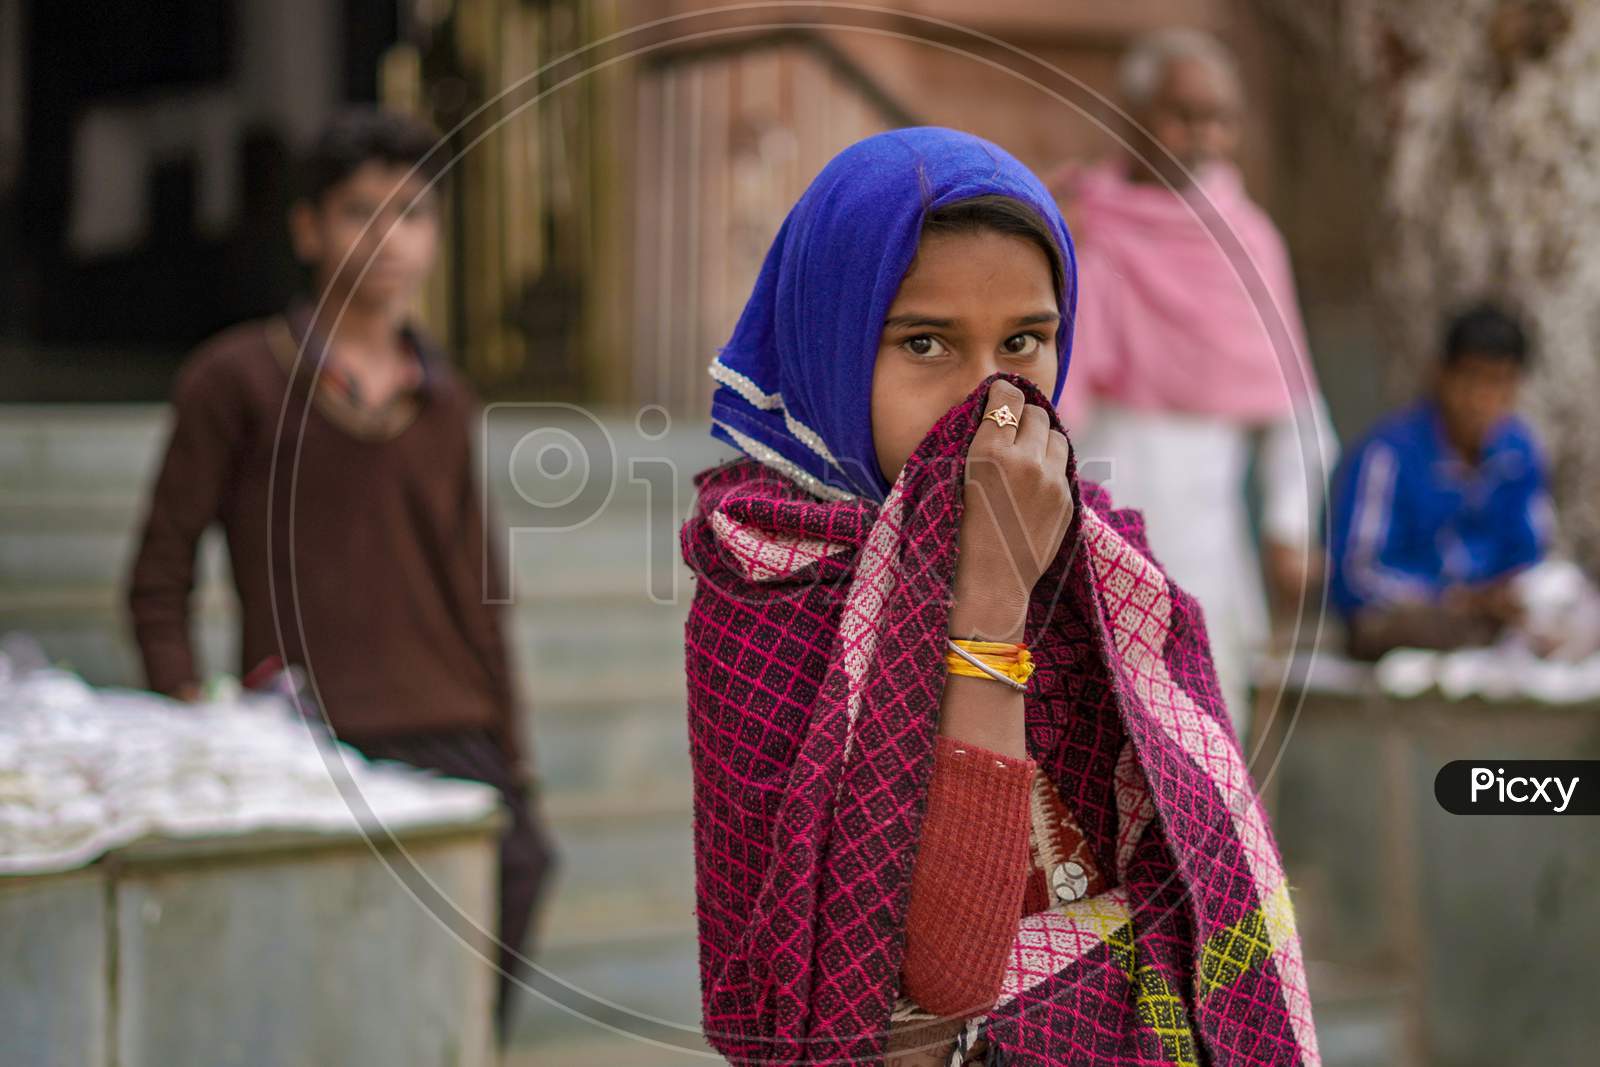 Pushkar, Rajasthan / India- June 5 2020 : A Girl In A Saree Holding A Part Of It In Front Of Her Face, Hiding Her Face.